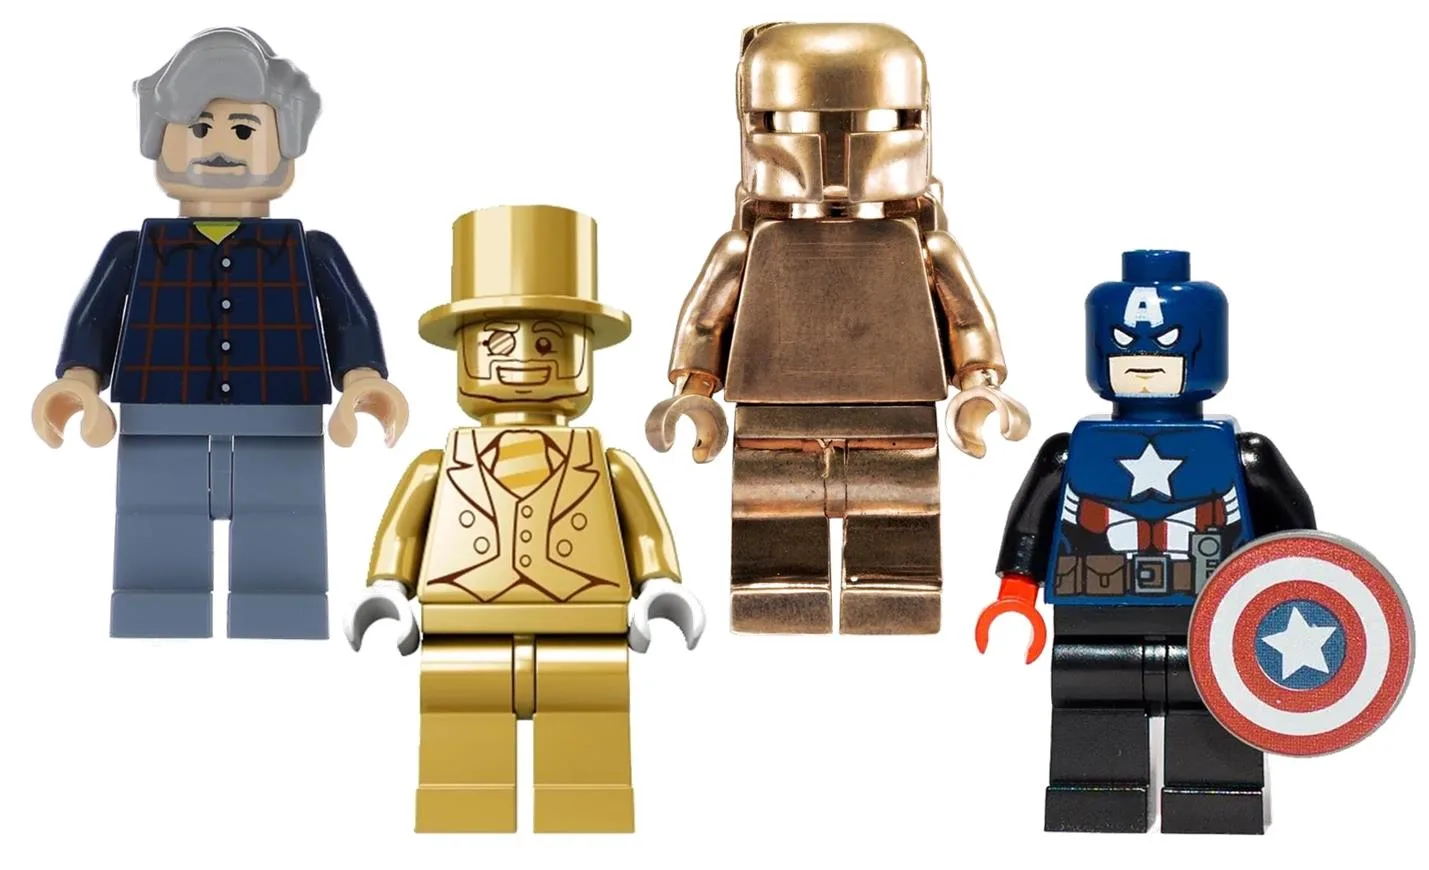 15 Rarest LEGO Minifigures Ever: Rarity Analysis and Current Prices